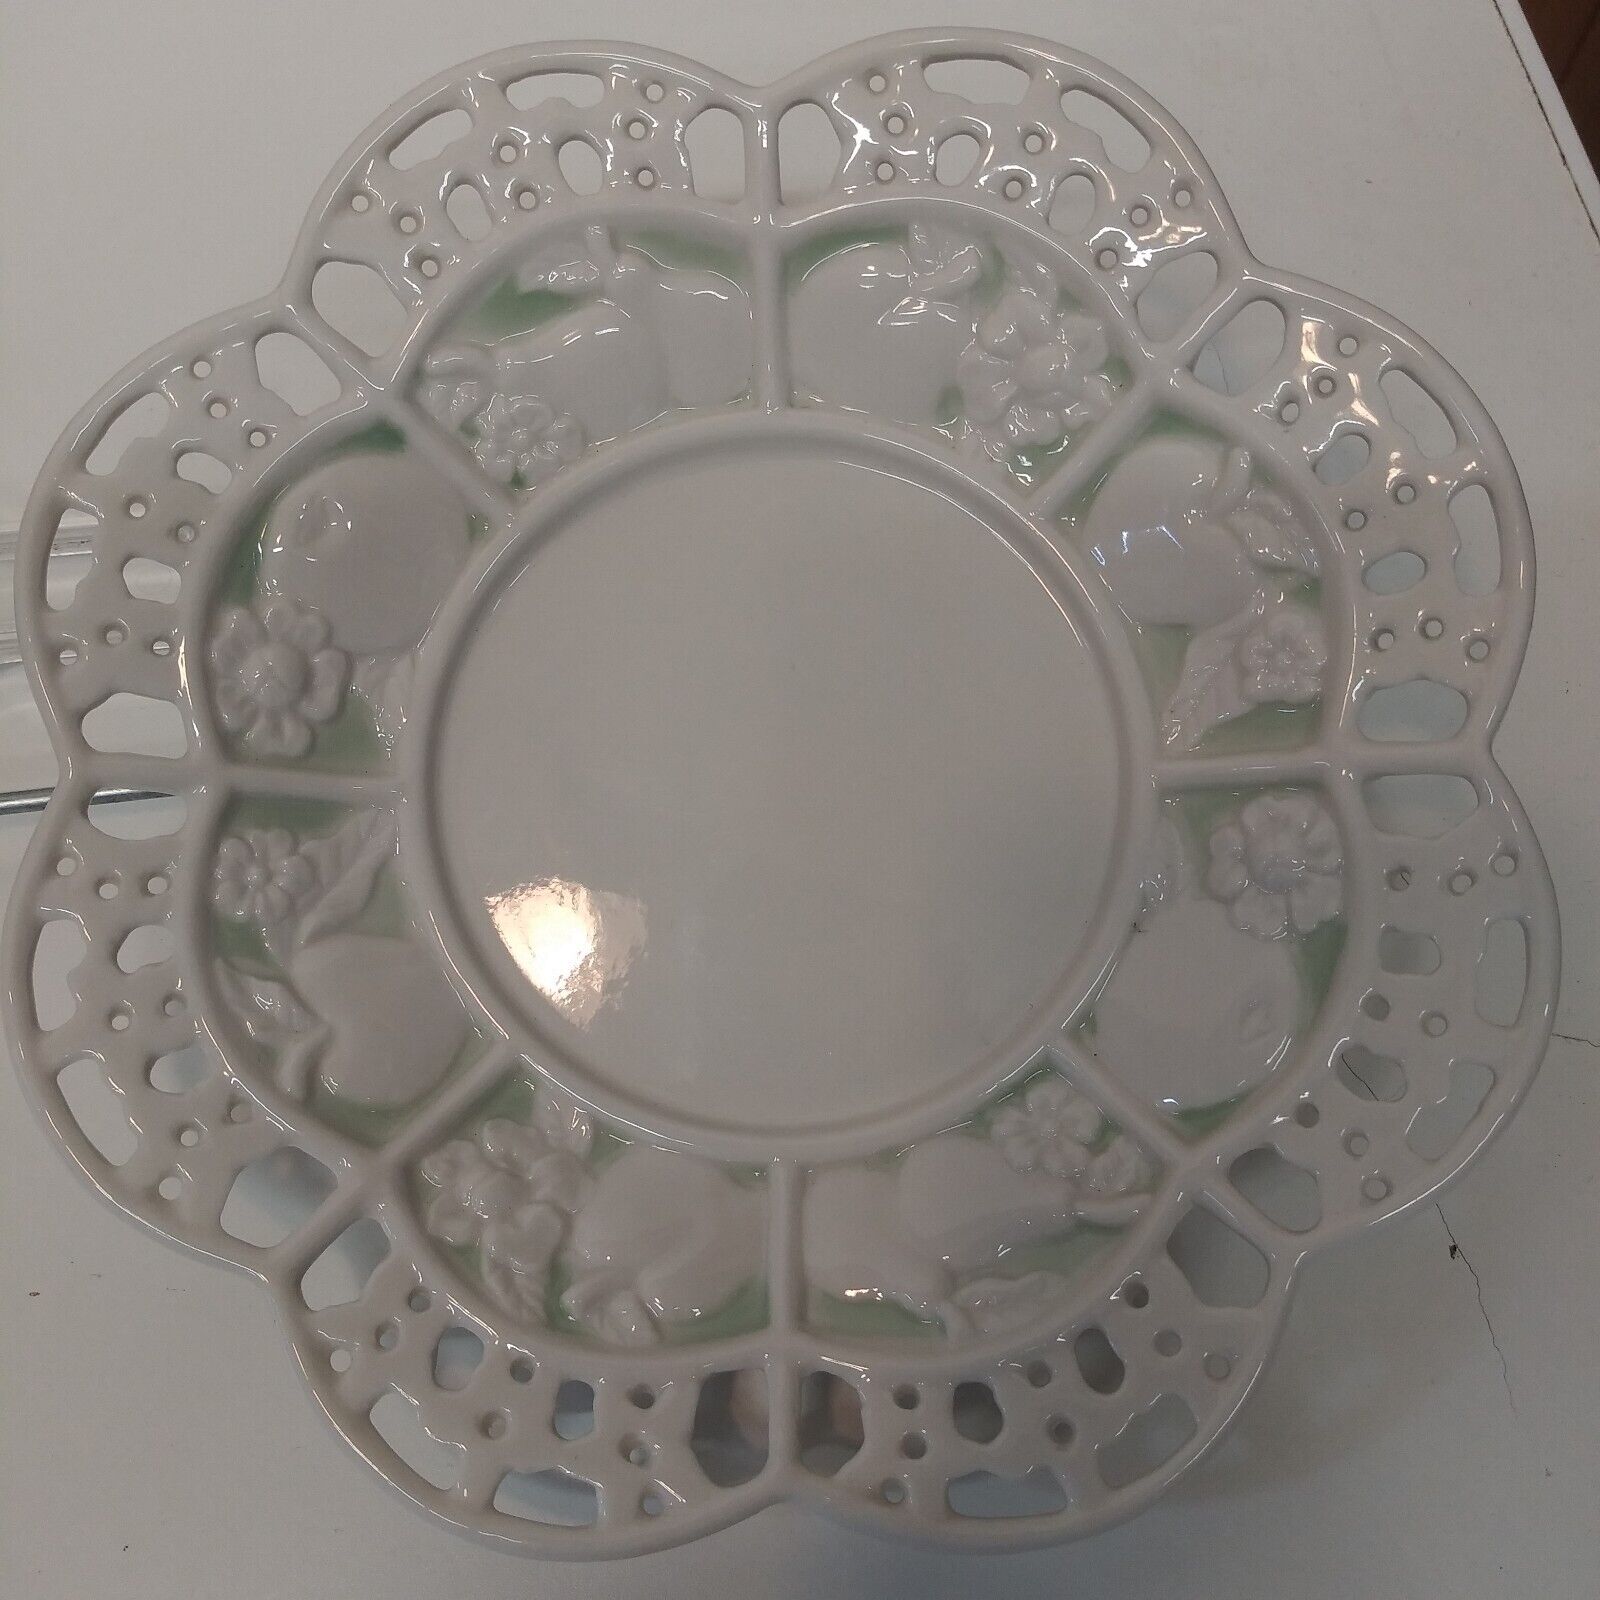 Avon China White/Green Lace and Fruit Pattern Ceramic Plate